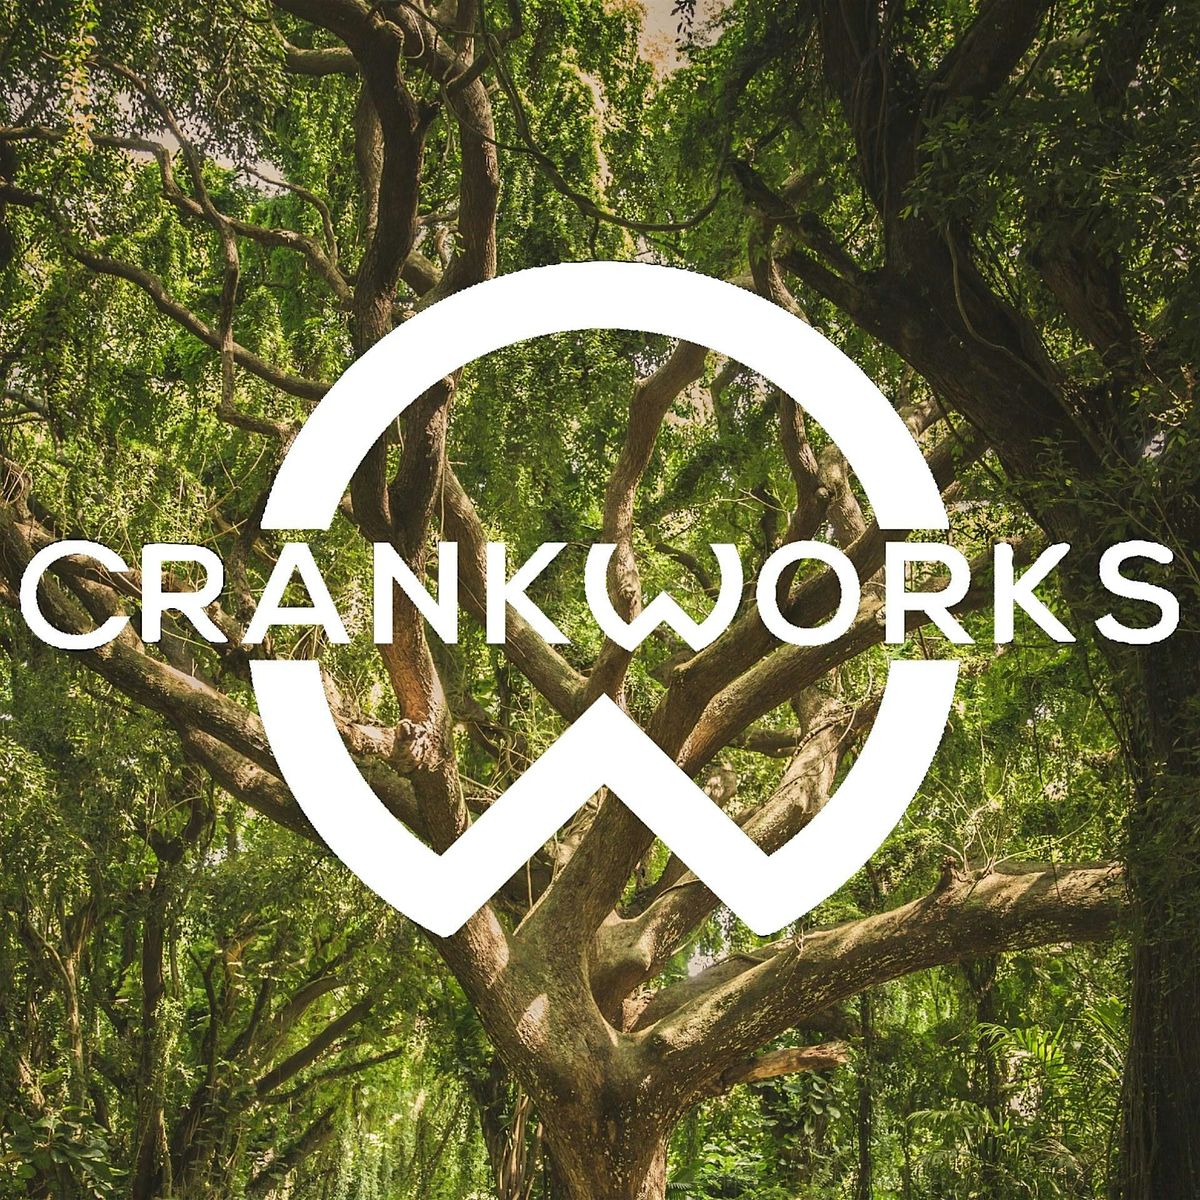 Crank Works Bicycle Brooksville Train Depot Tuesday Evening Road Bike Ride